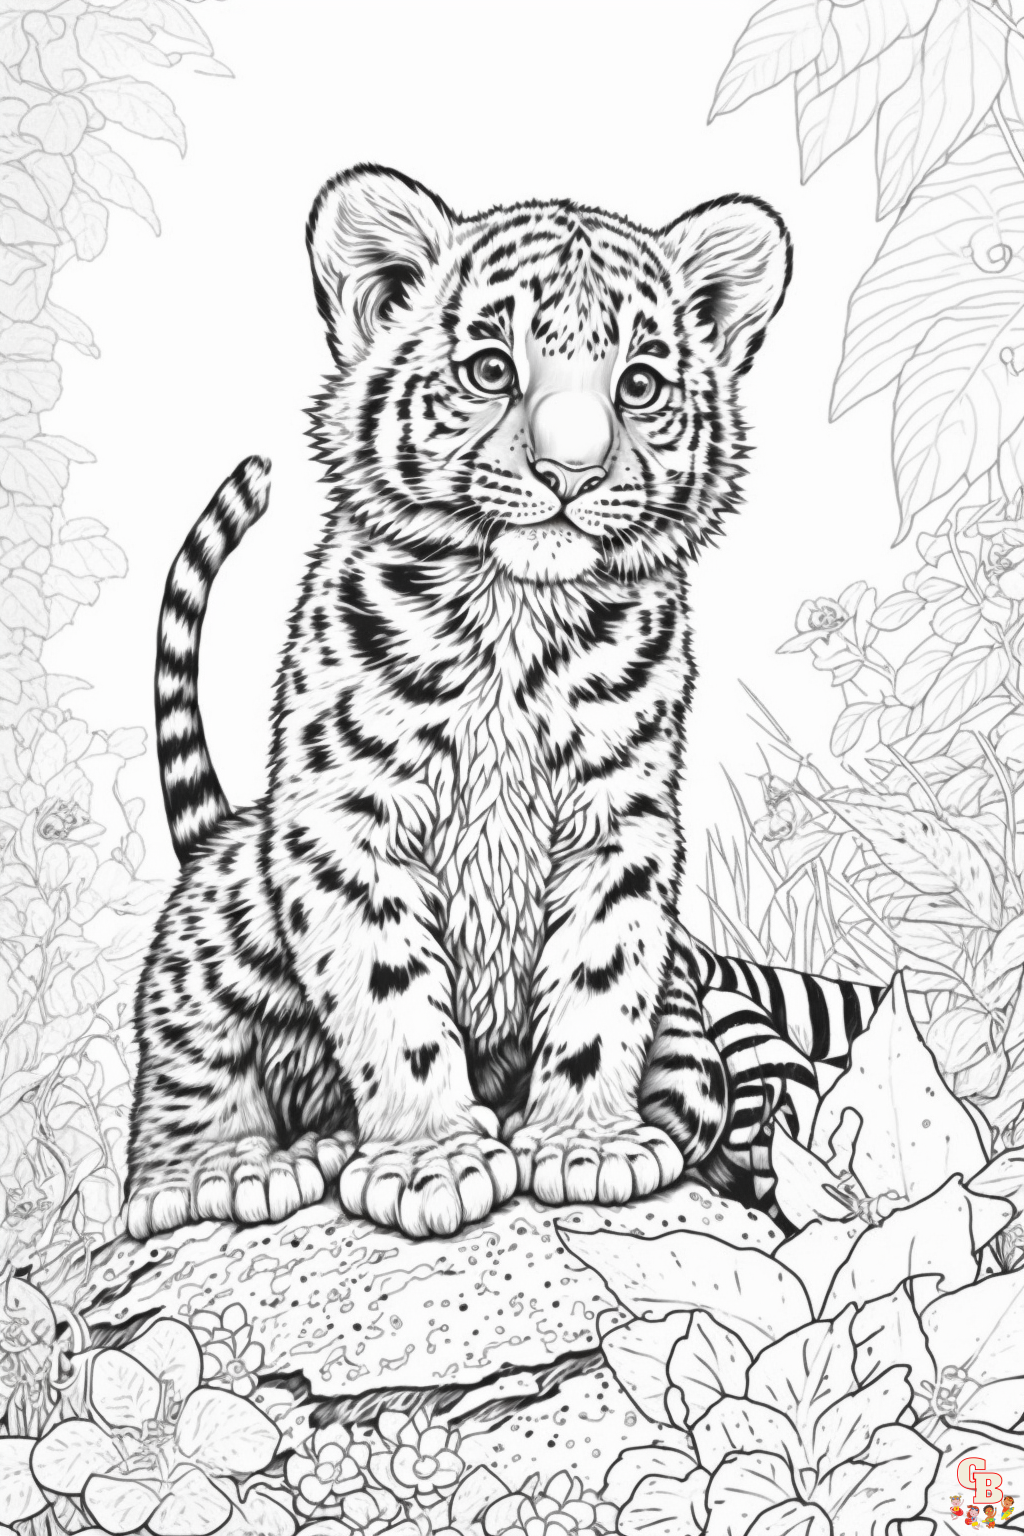 Tiger coloring pages printable free and easy to by gbcoloring on